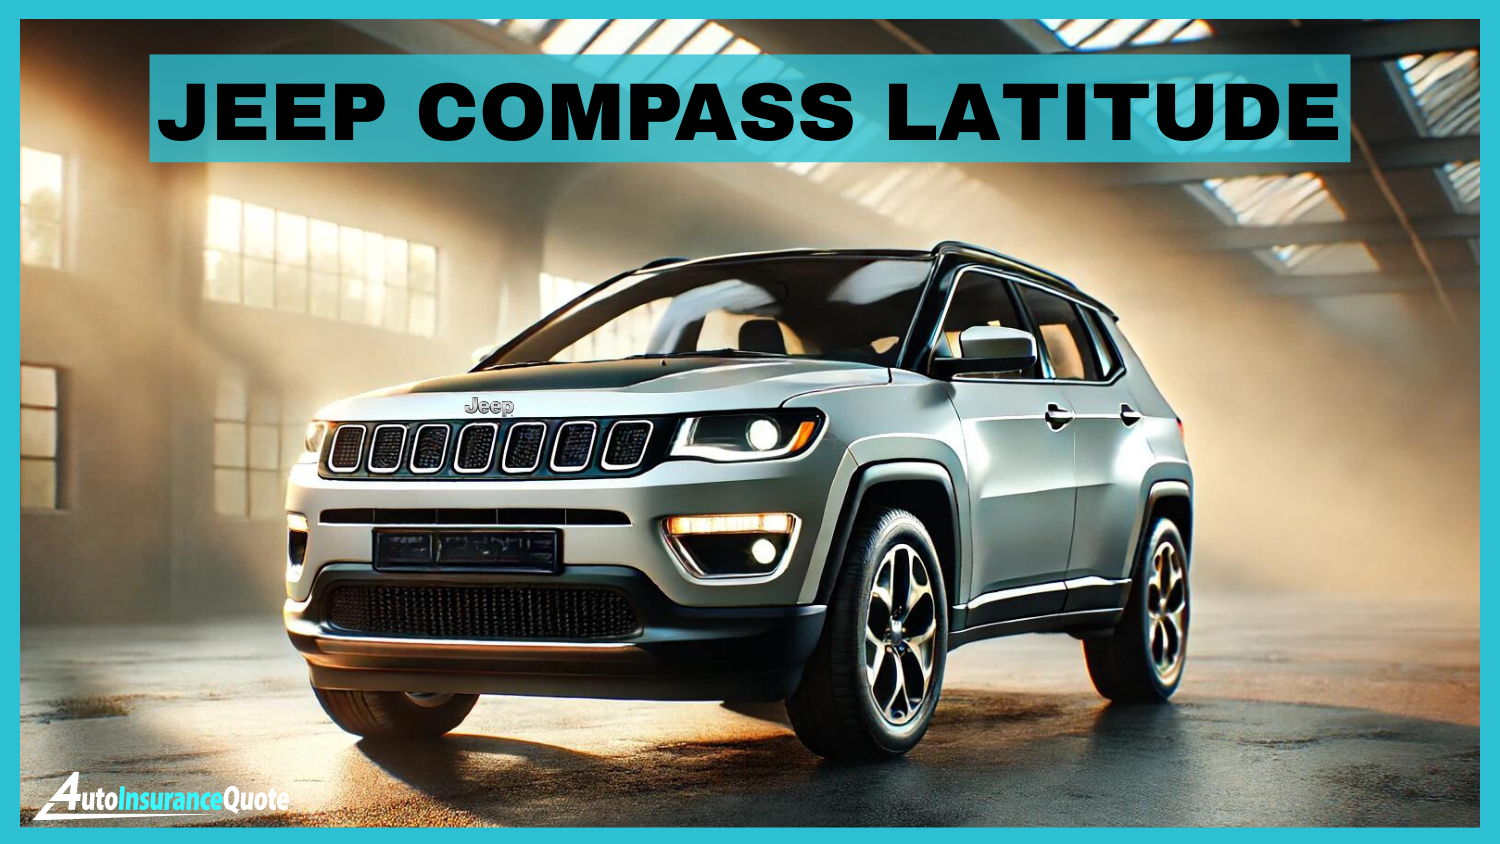 Jeep Compass Latitude: Cheapest Cars for 17-Year-Olds to Insure